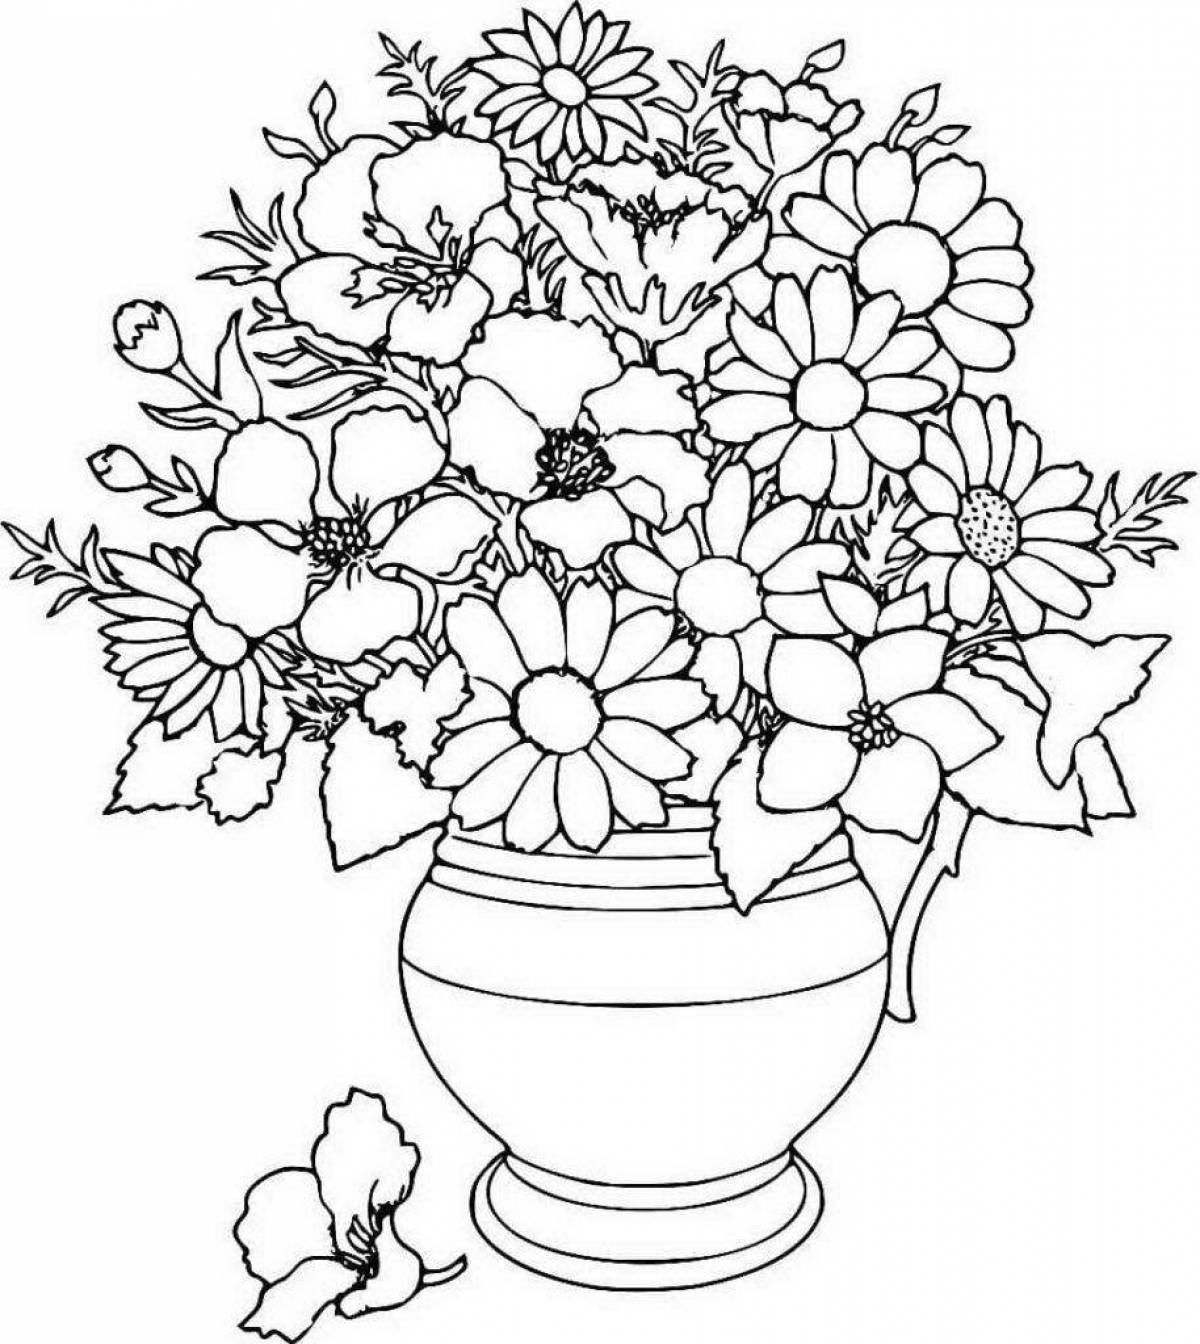 Large vase with flowers coloring book for children 5-6 years old